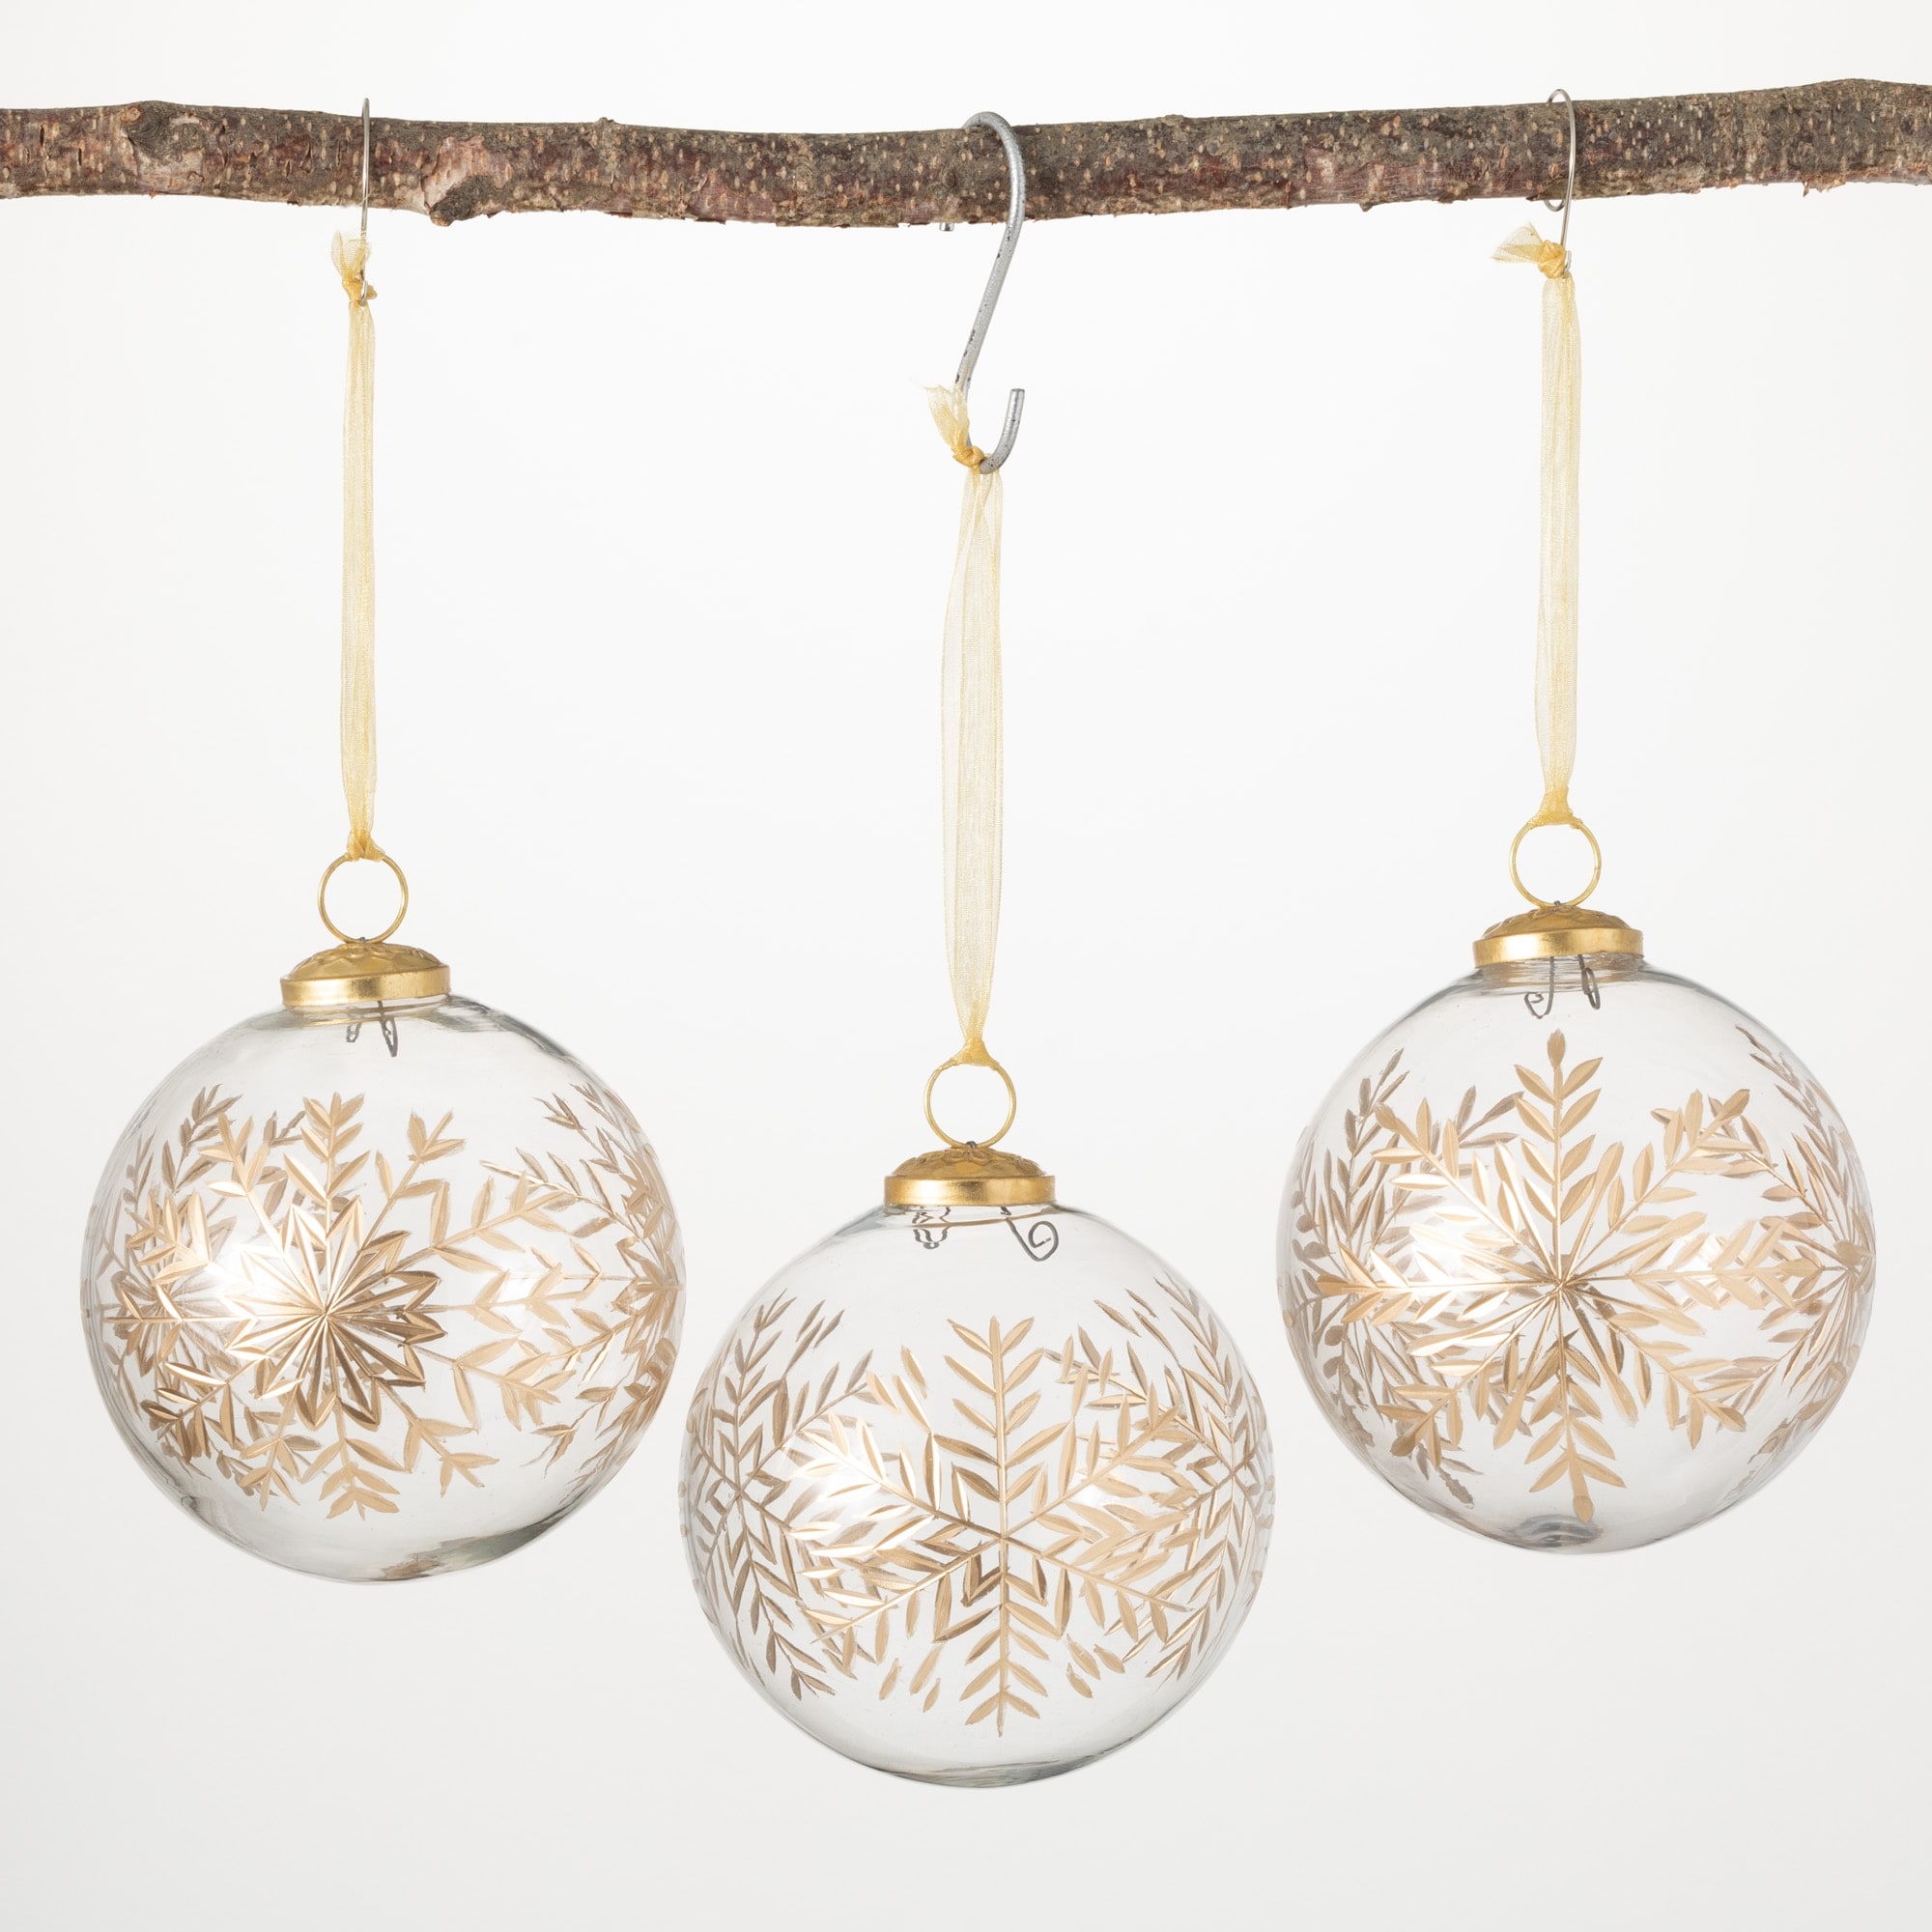 Club Pack of 36 Clear Icy Small Snowflake Ornaments 3.5 - Bed Bath &  Beyond - 16605942